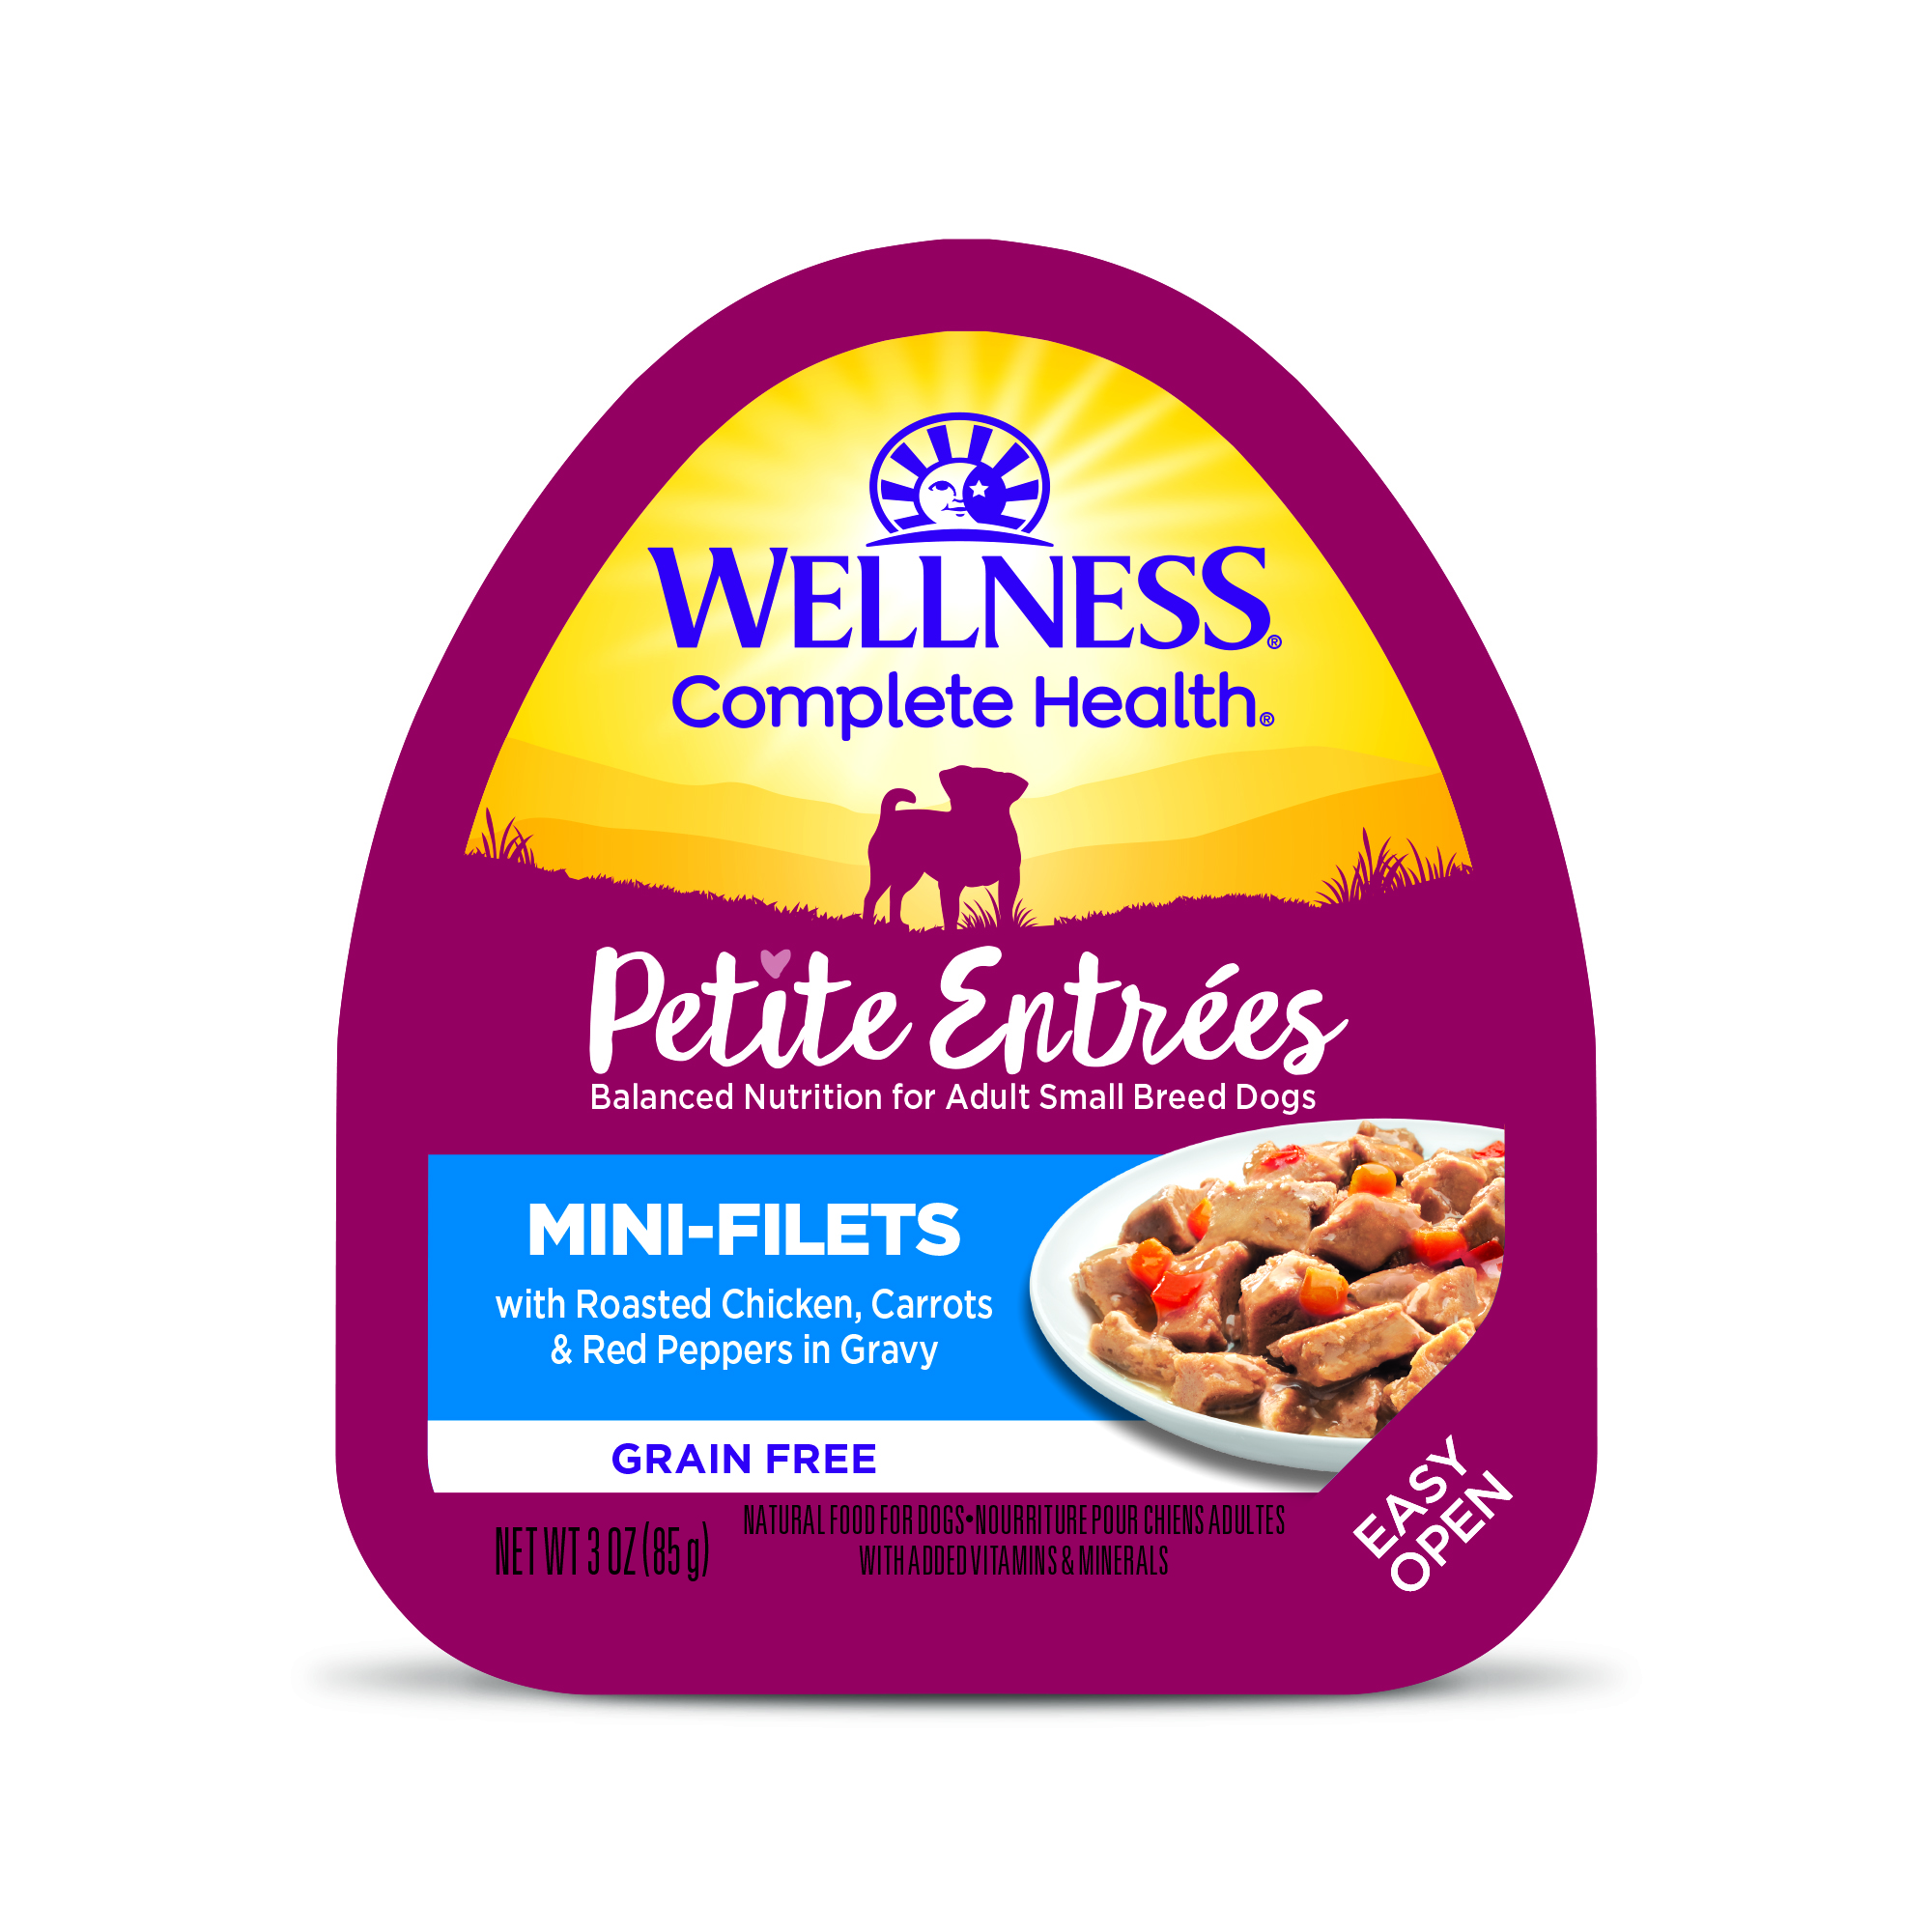 Wellness Complete Health Petite Entrées Mini Fillets Roasted Chicken, Carrots & Red Peppers